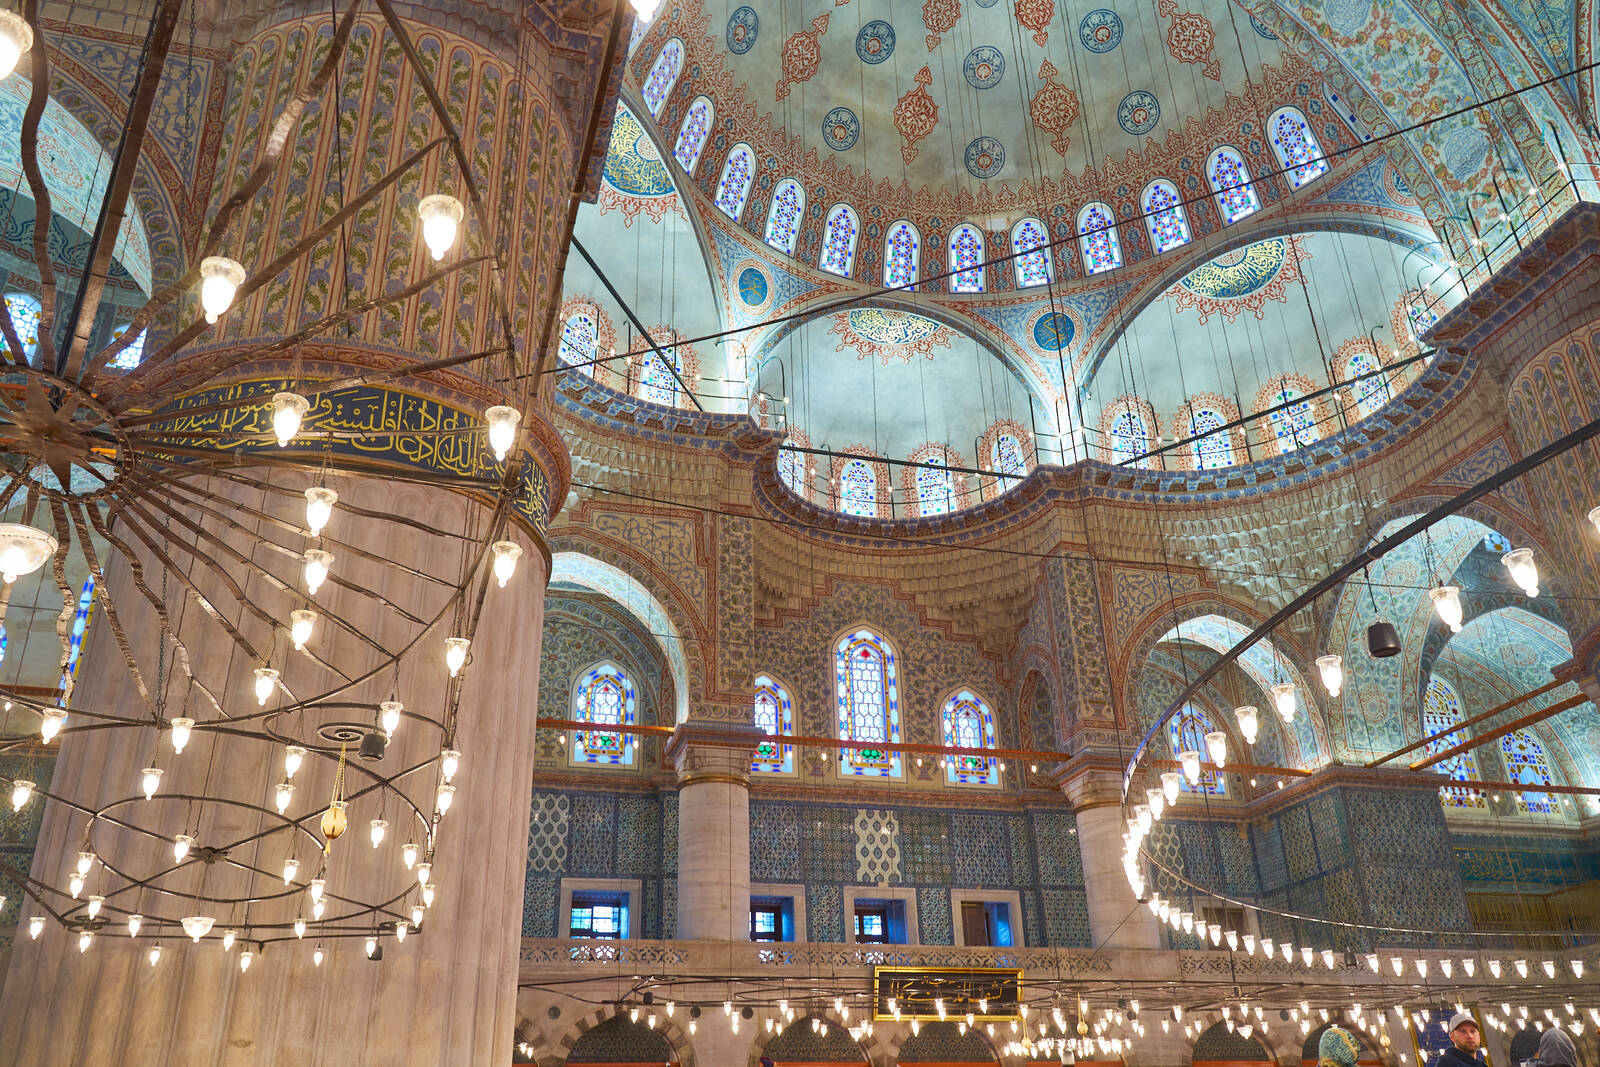 Image of Blue Mosque by Rostikslav Nepomnyaschiy